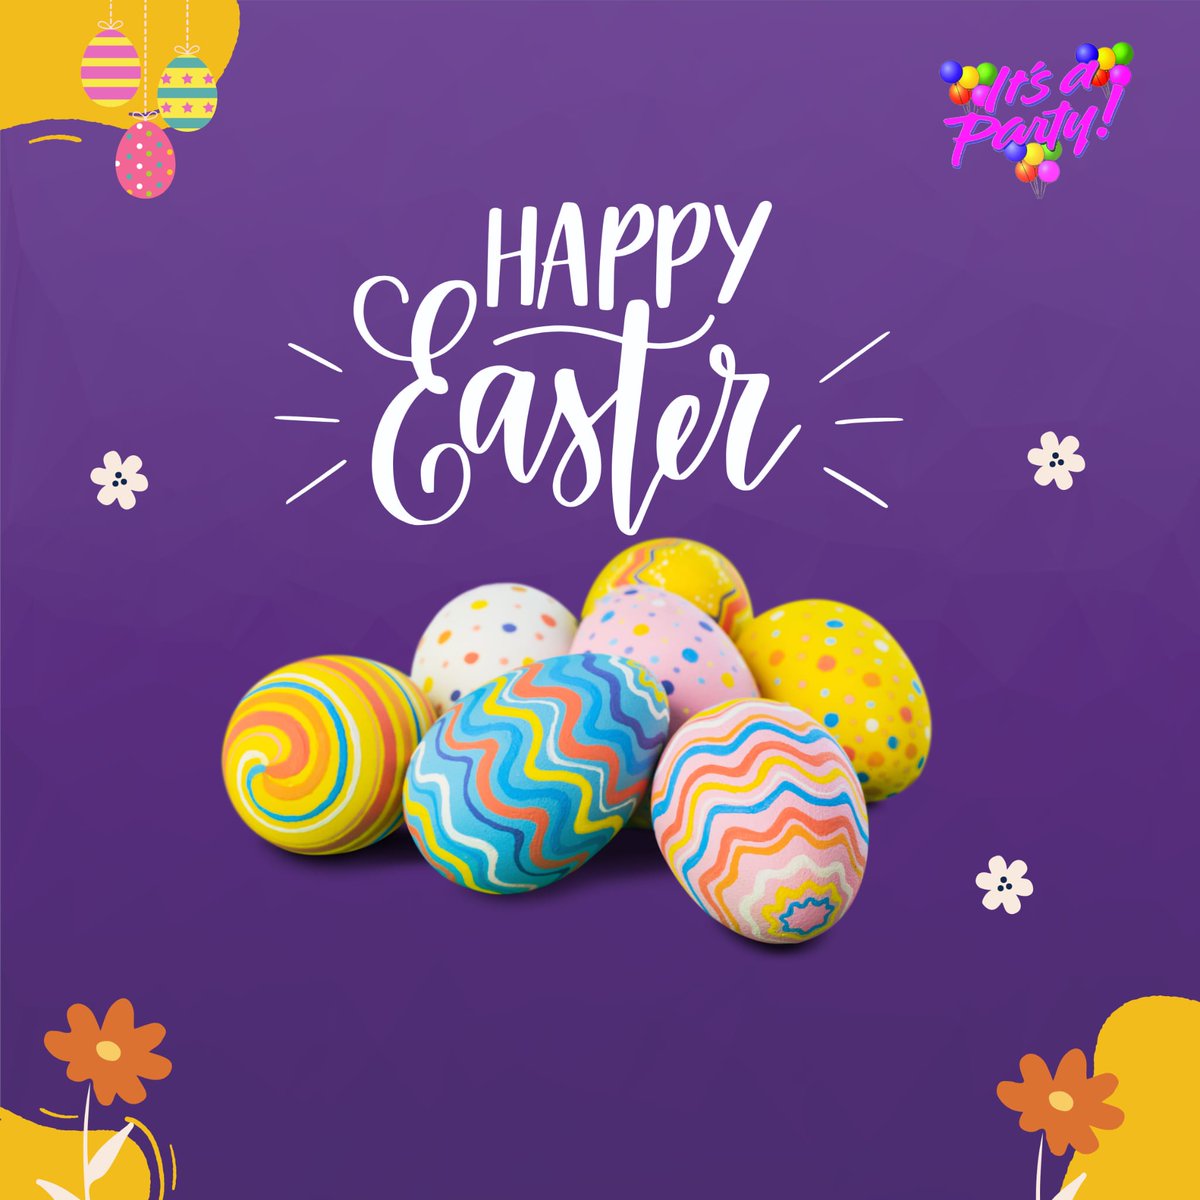 May your Easter be filled with joy, peace, and plenty of chocolate! 🐣 Happy Easter to all!

#HappyEaster 
#itsapartyja 
#HappyEastereveryone
#HappyEasterMonday